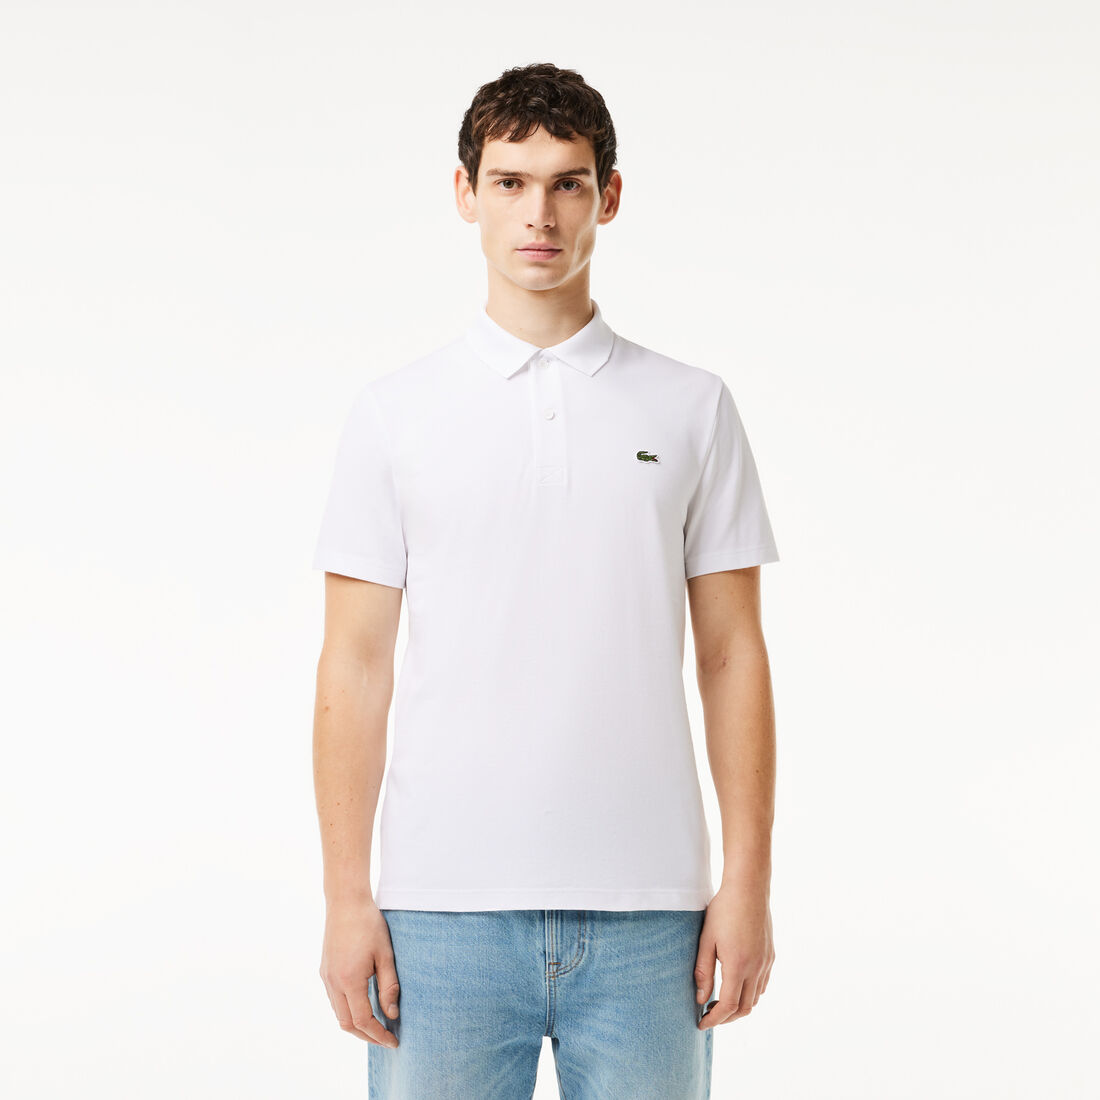 Regular Fit Polyester Cotton Polo Shirt - DH0783-00-001